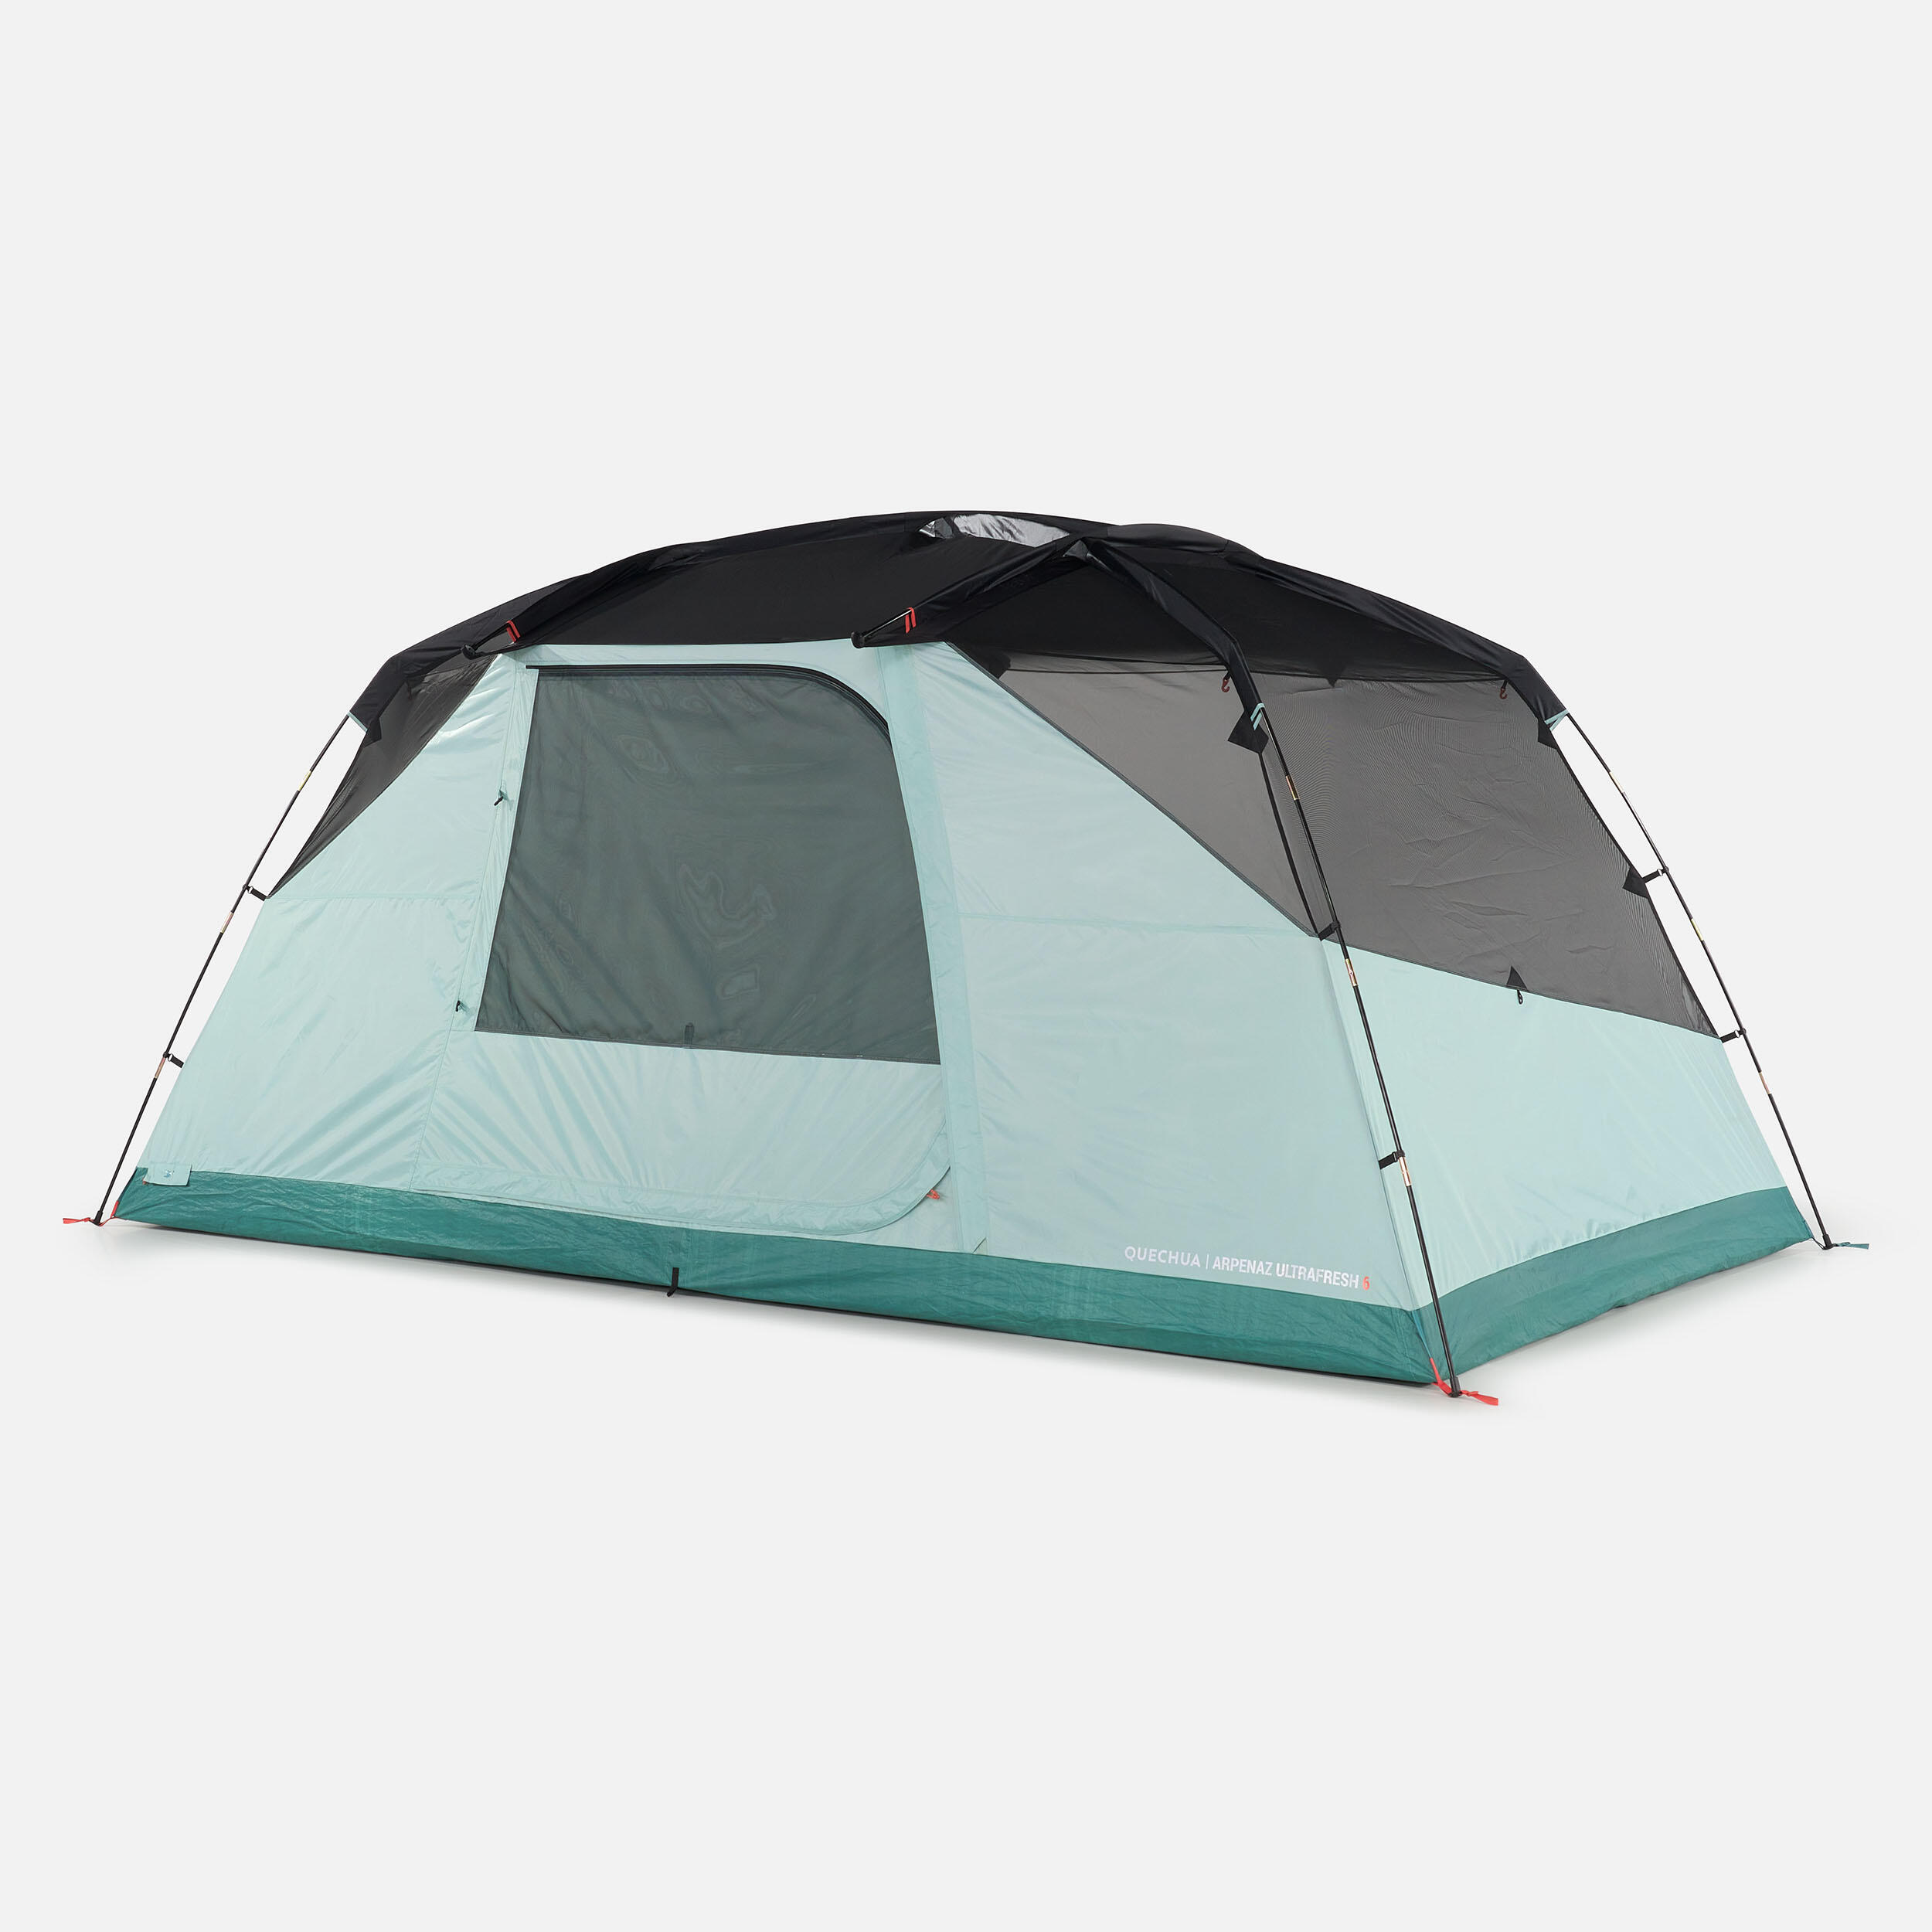 Camping tent with poles - Arpenaz 6 ULTRAFRESH - 6 Person 8/19